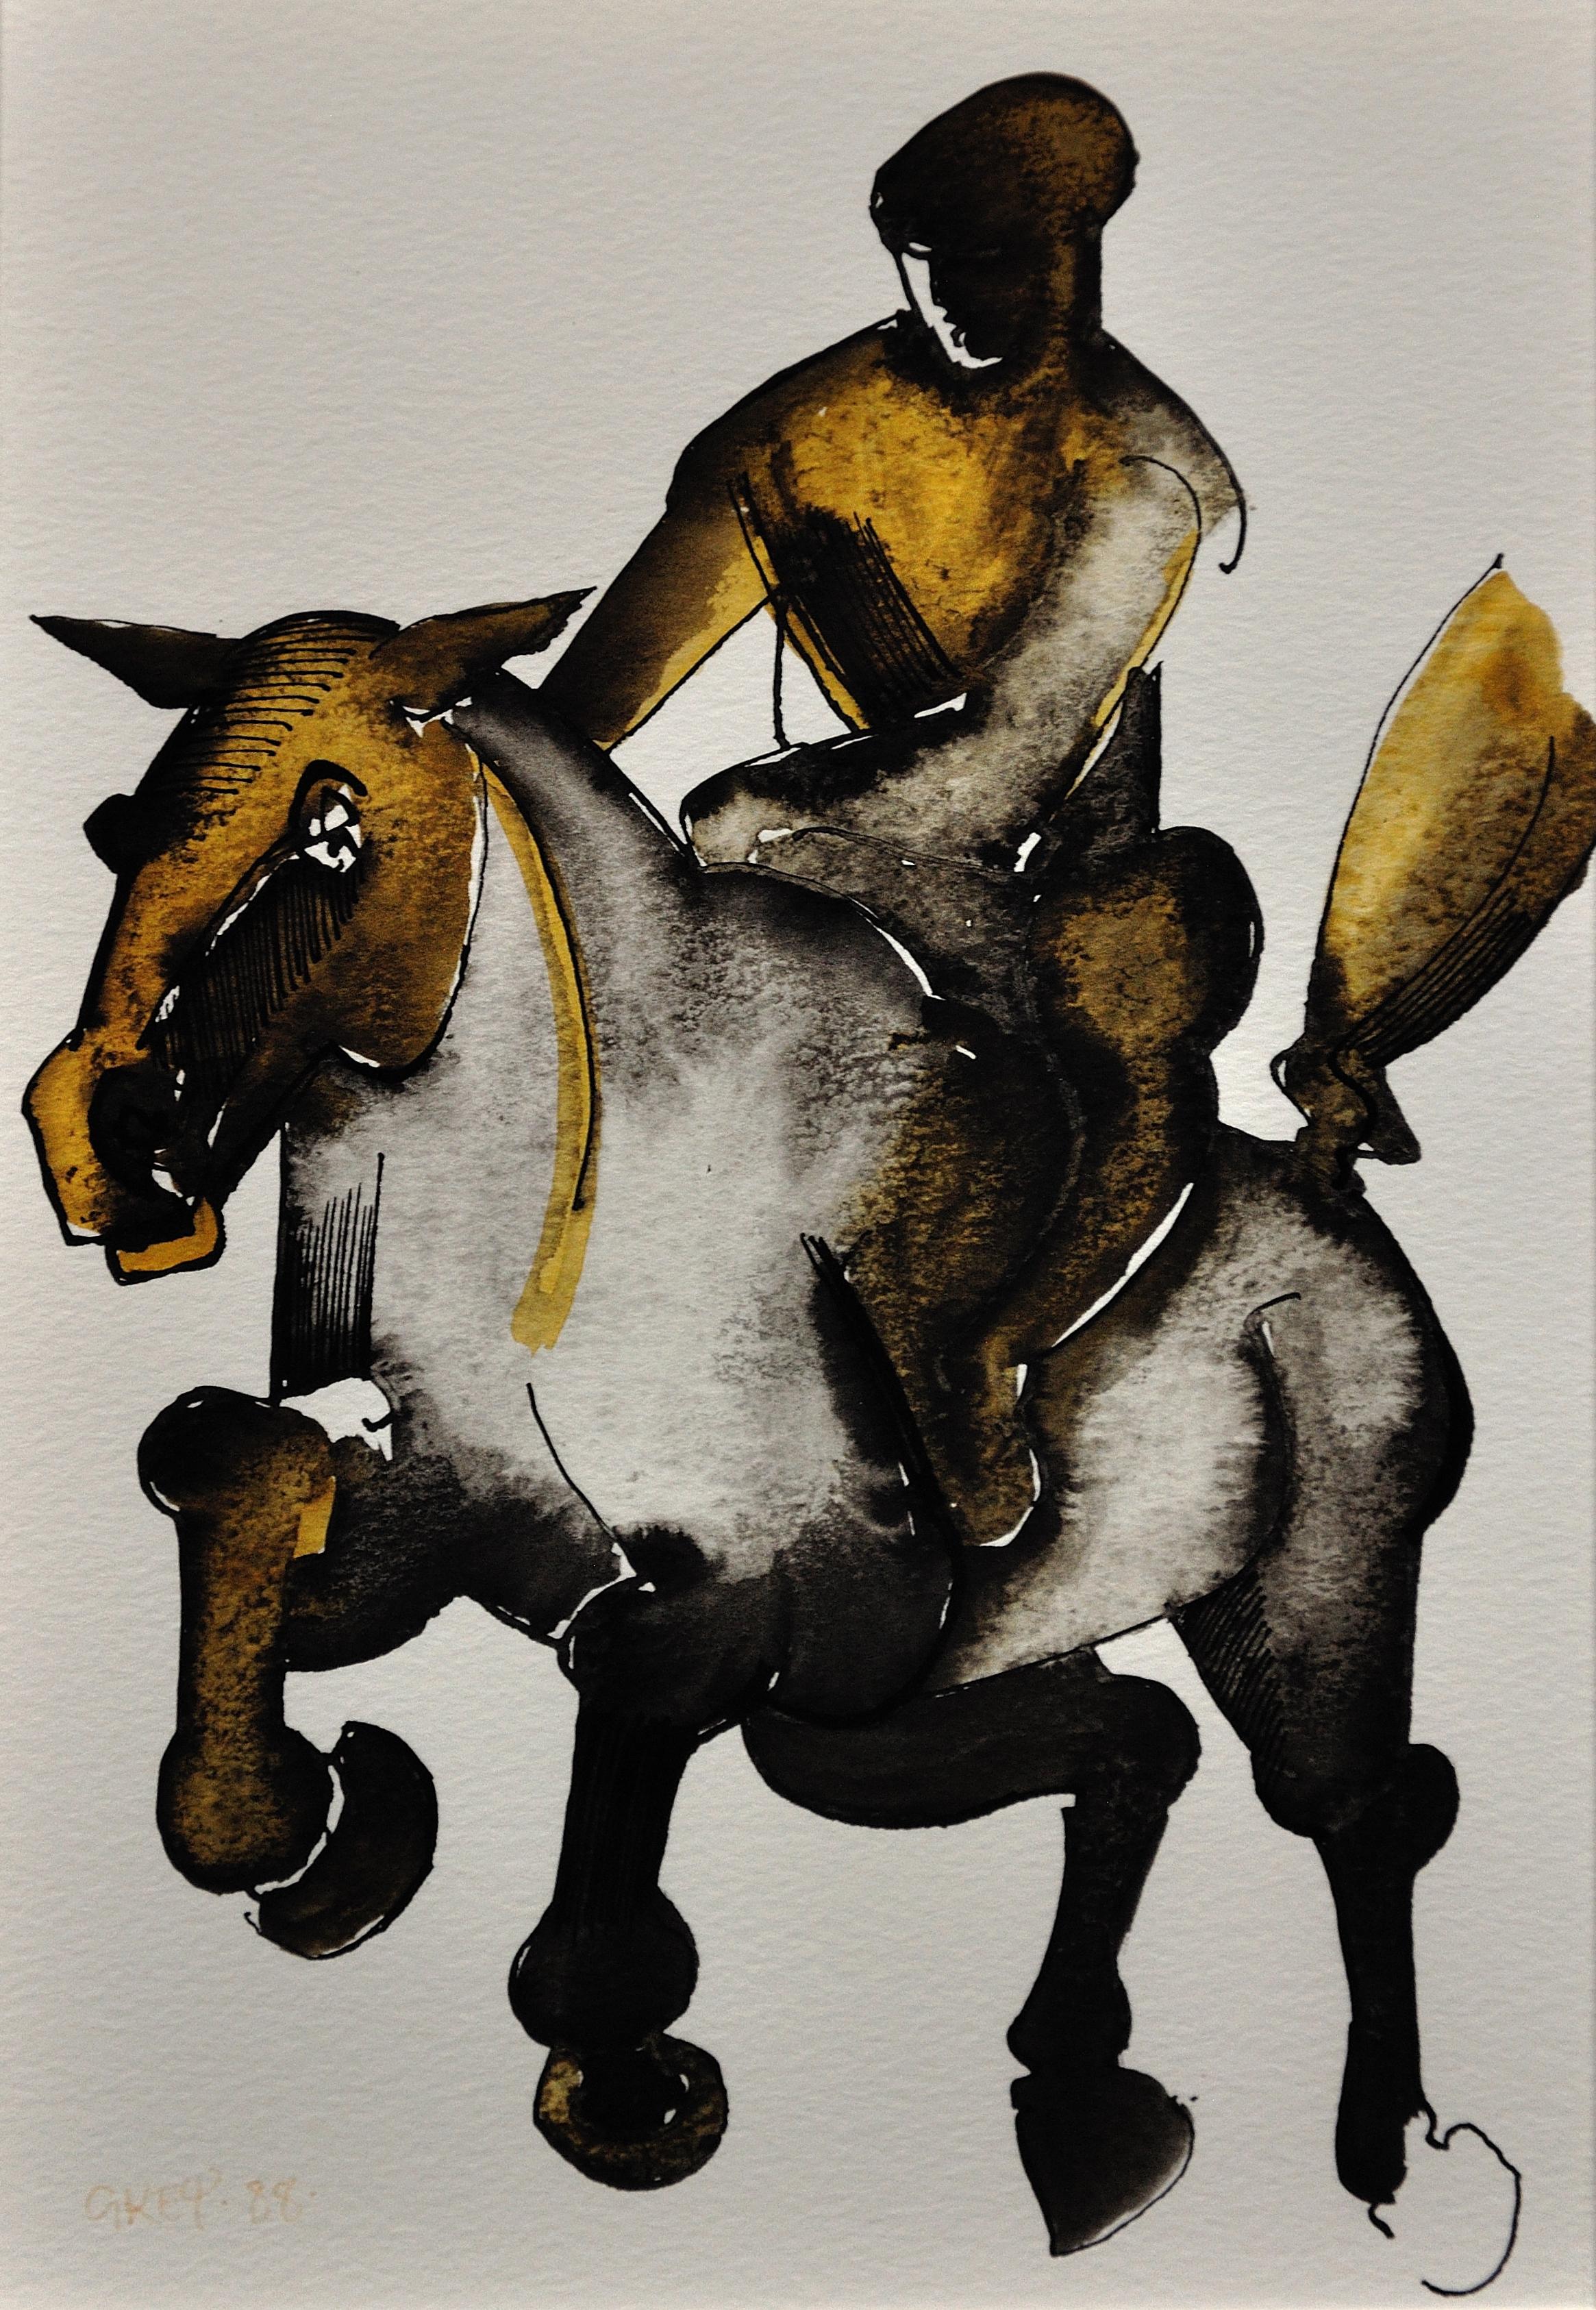 Geoffrey Key. 
English ( b.1941 ).
Horse and Rider I, 1988.
Ink and Watercolor Wash. Signed & Dated.
Image size 10 inches x 6.7 inches ( 25.5cm x 17cm ).
Frame size 16.1 inches x 12.6 inches ( 41cm x 32cm ).

Available for sale is this original